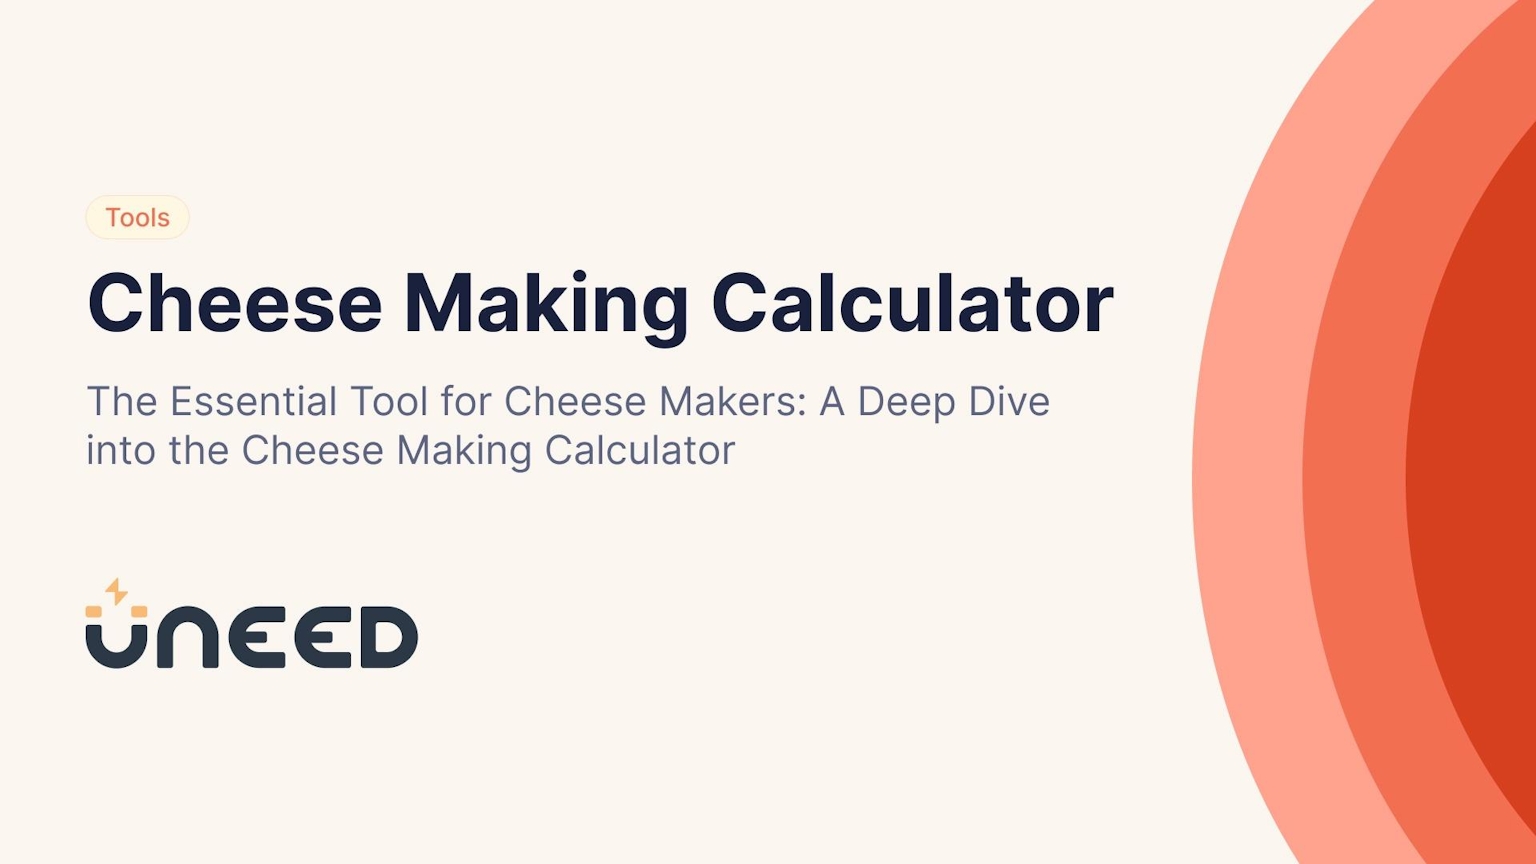 The Essential Tool for Cheese Makers: A Deep Dive into the Cheese Making Calculator